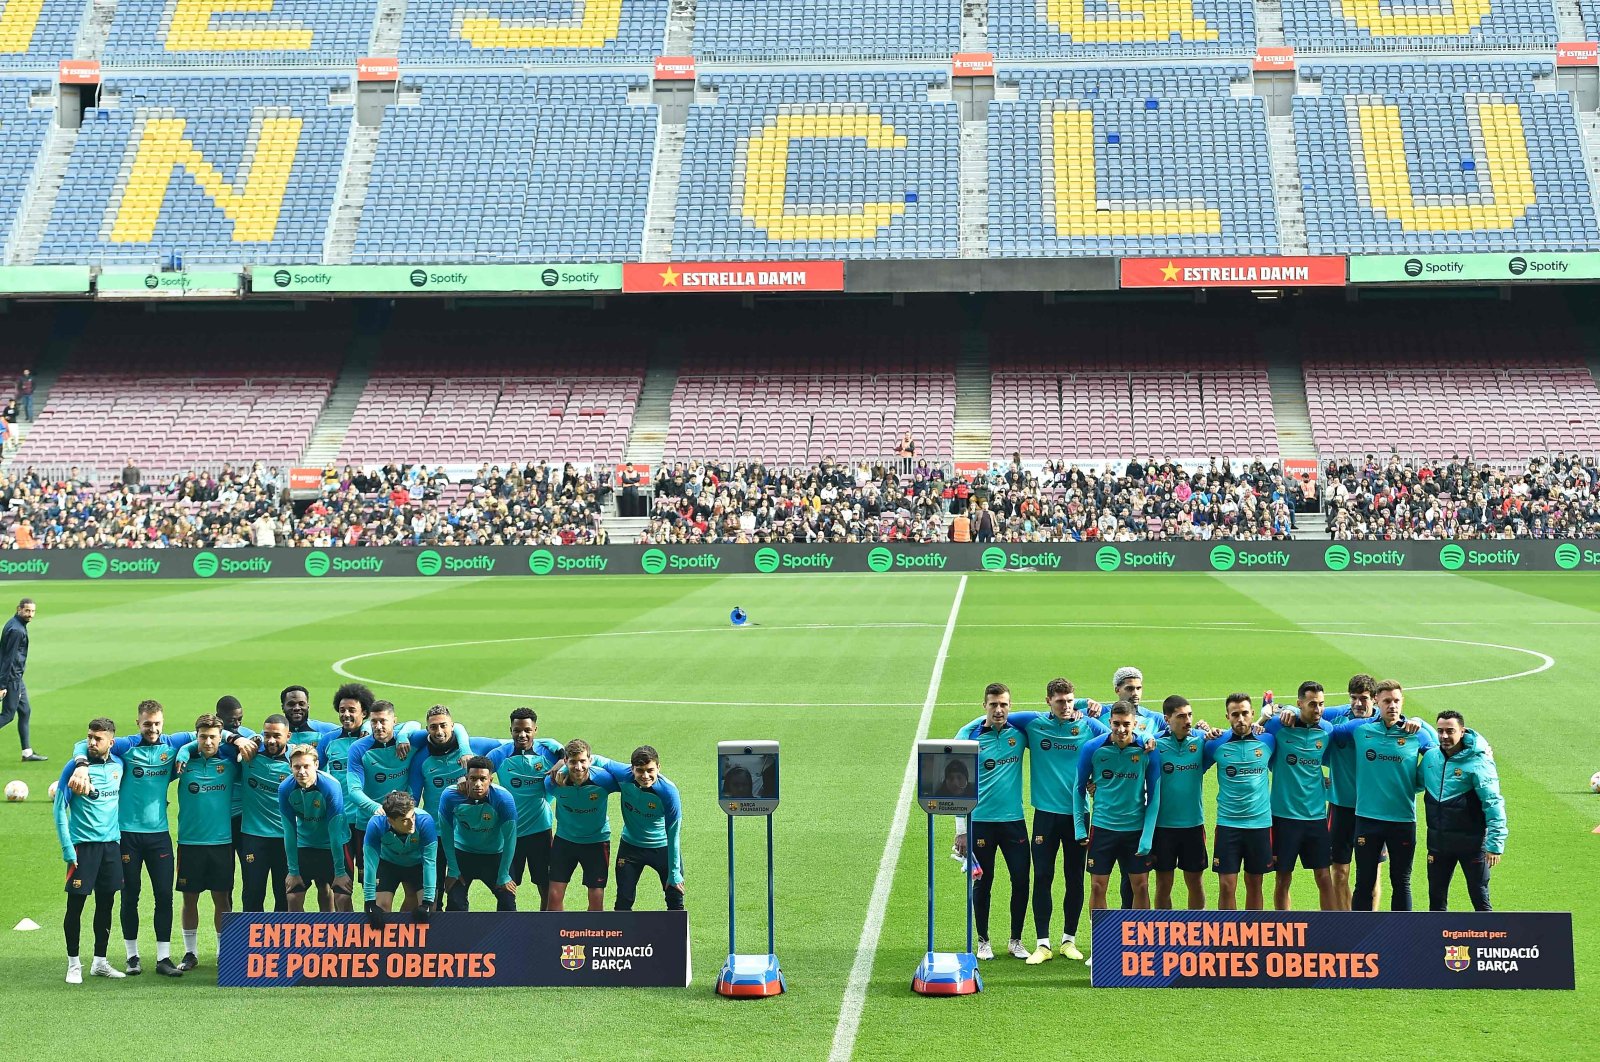 FC Barcelona players pose for pictures during a training session open to fans at the Camp Nou stadium in Barcelona, Spain, Jan. 2, 2023. (AFP Photo)